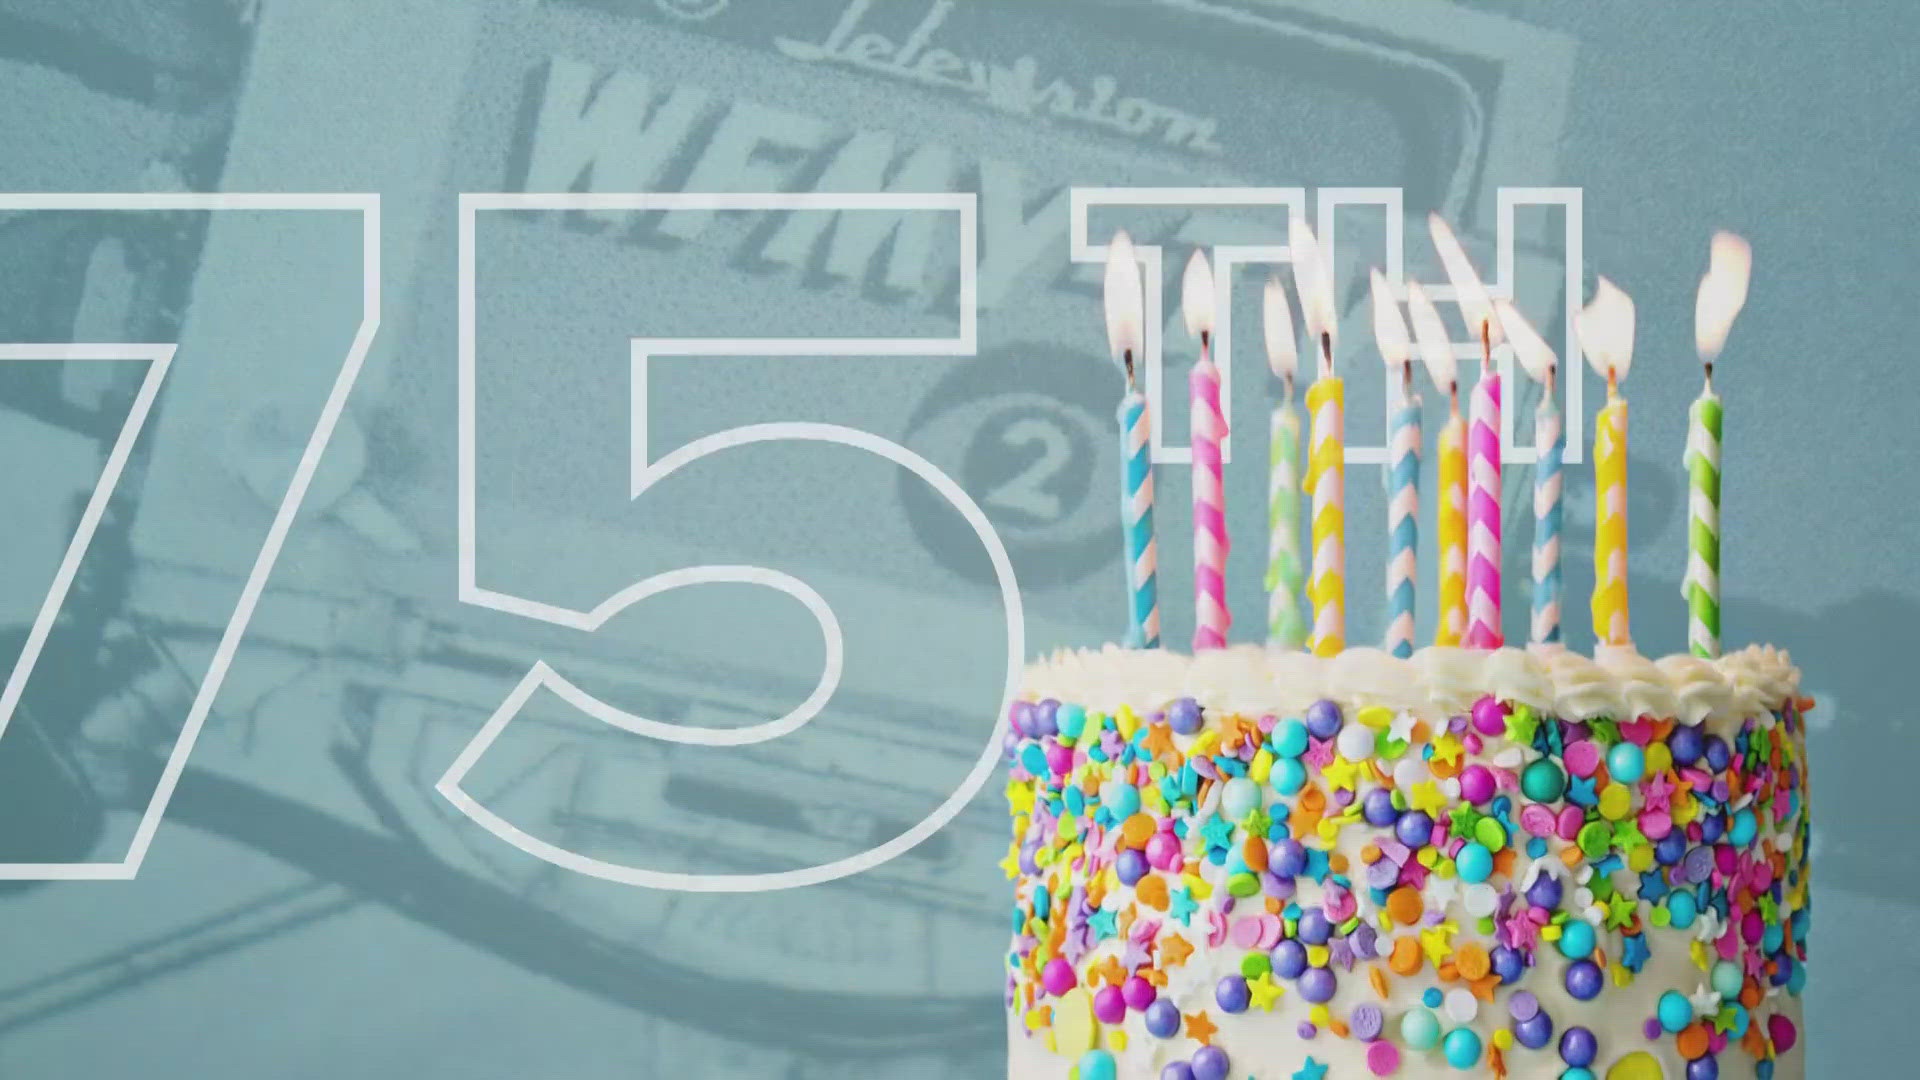 This year, WFMY New 2 is turning 75. So, we're celebrating viewers turning 75 as well!